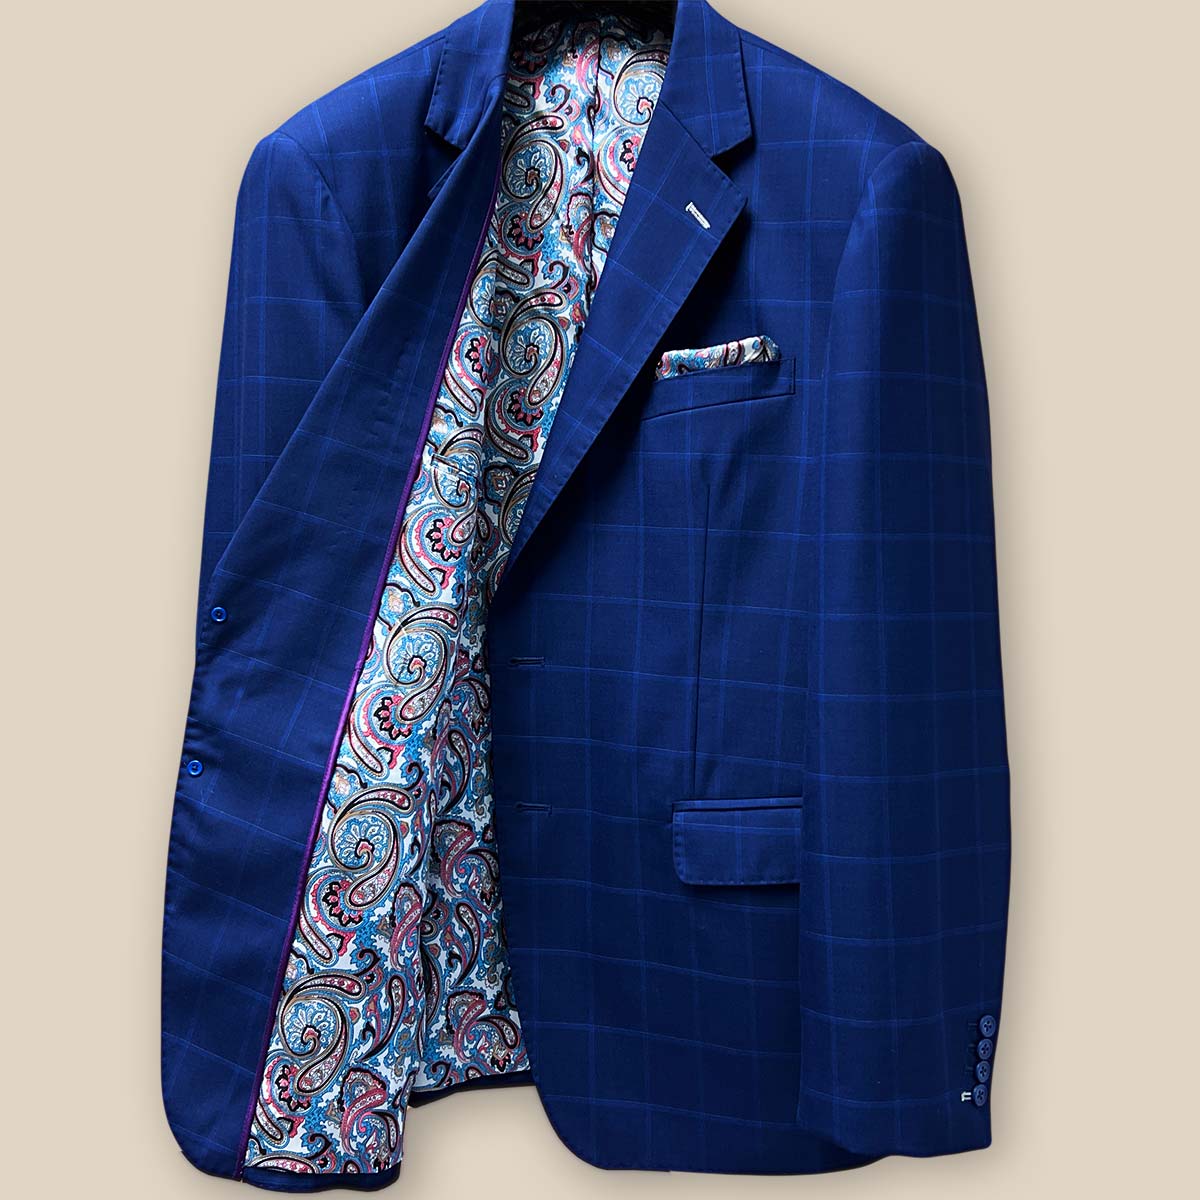 Interior view of the right side of the jacket showing the multi-color fancy paisley lining and detailed craftsmanship.